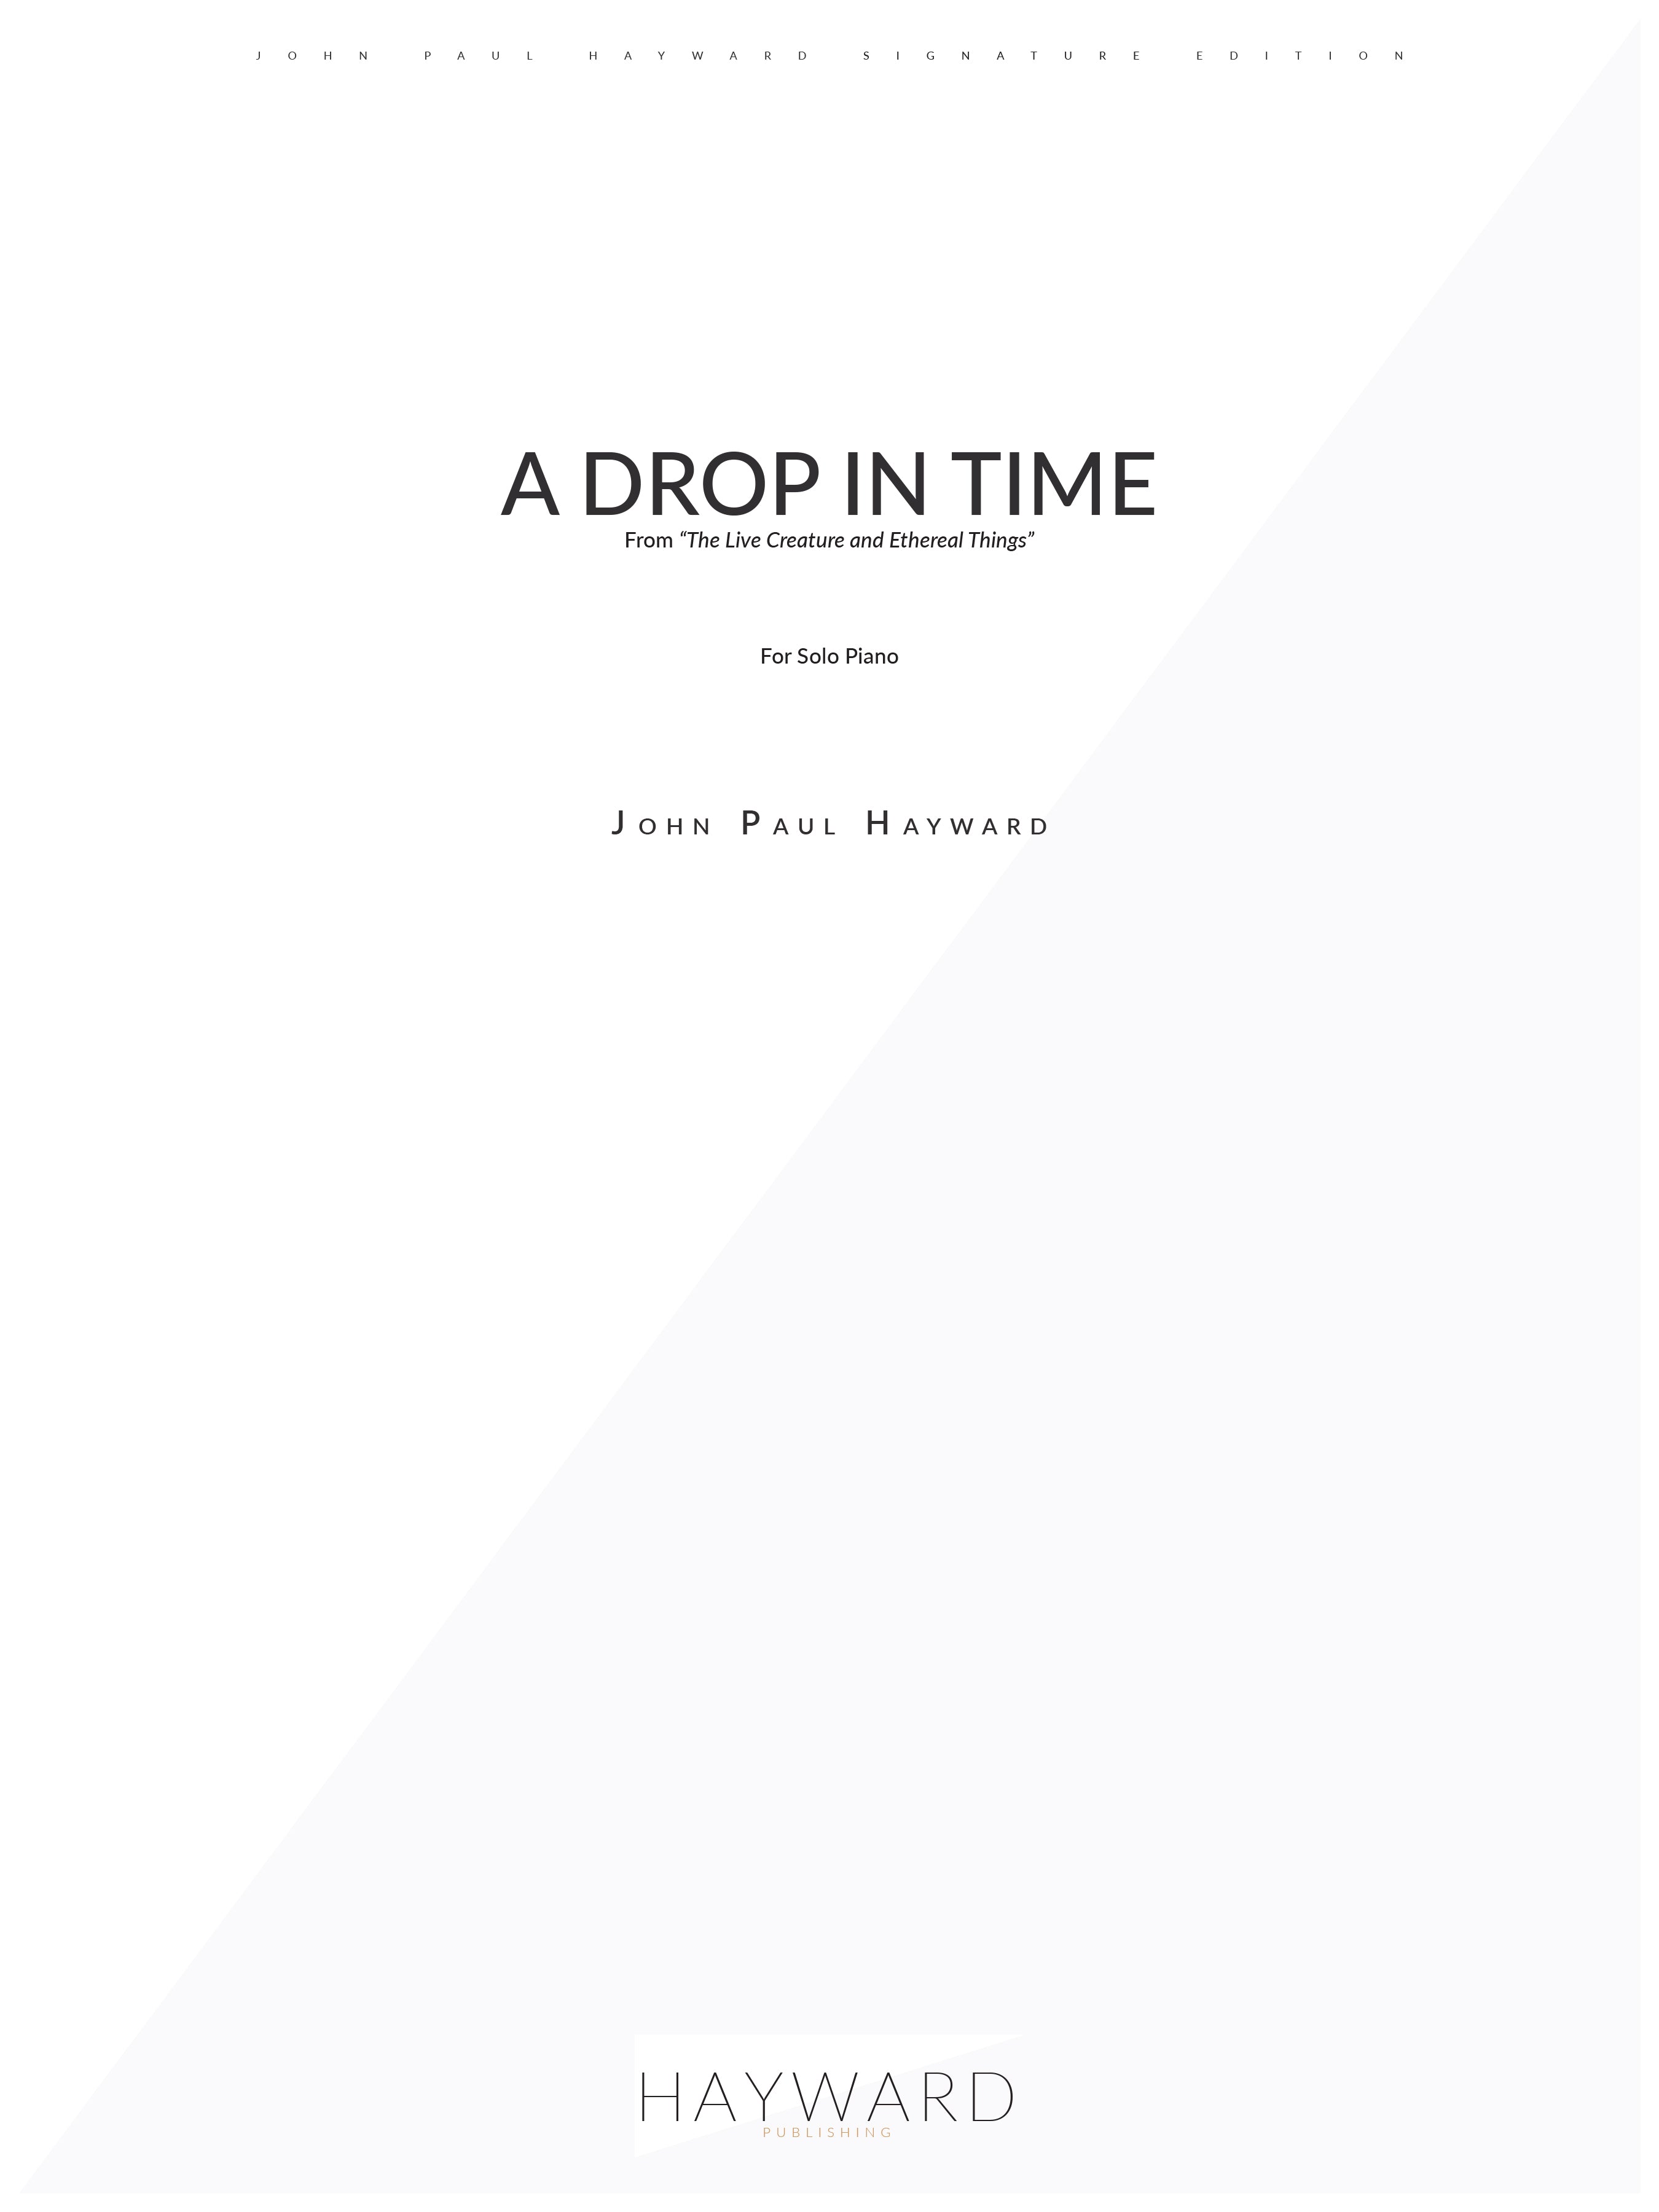 A Drop in Time